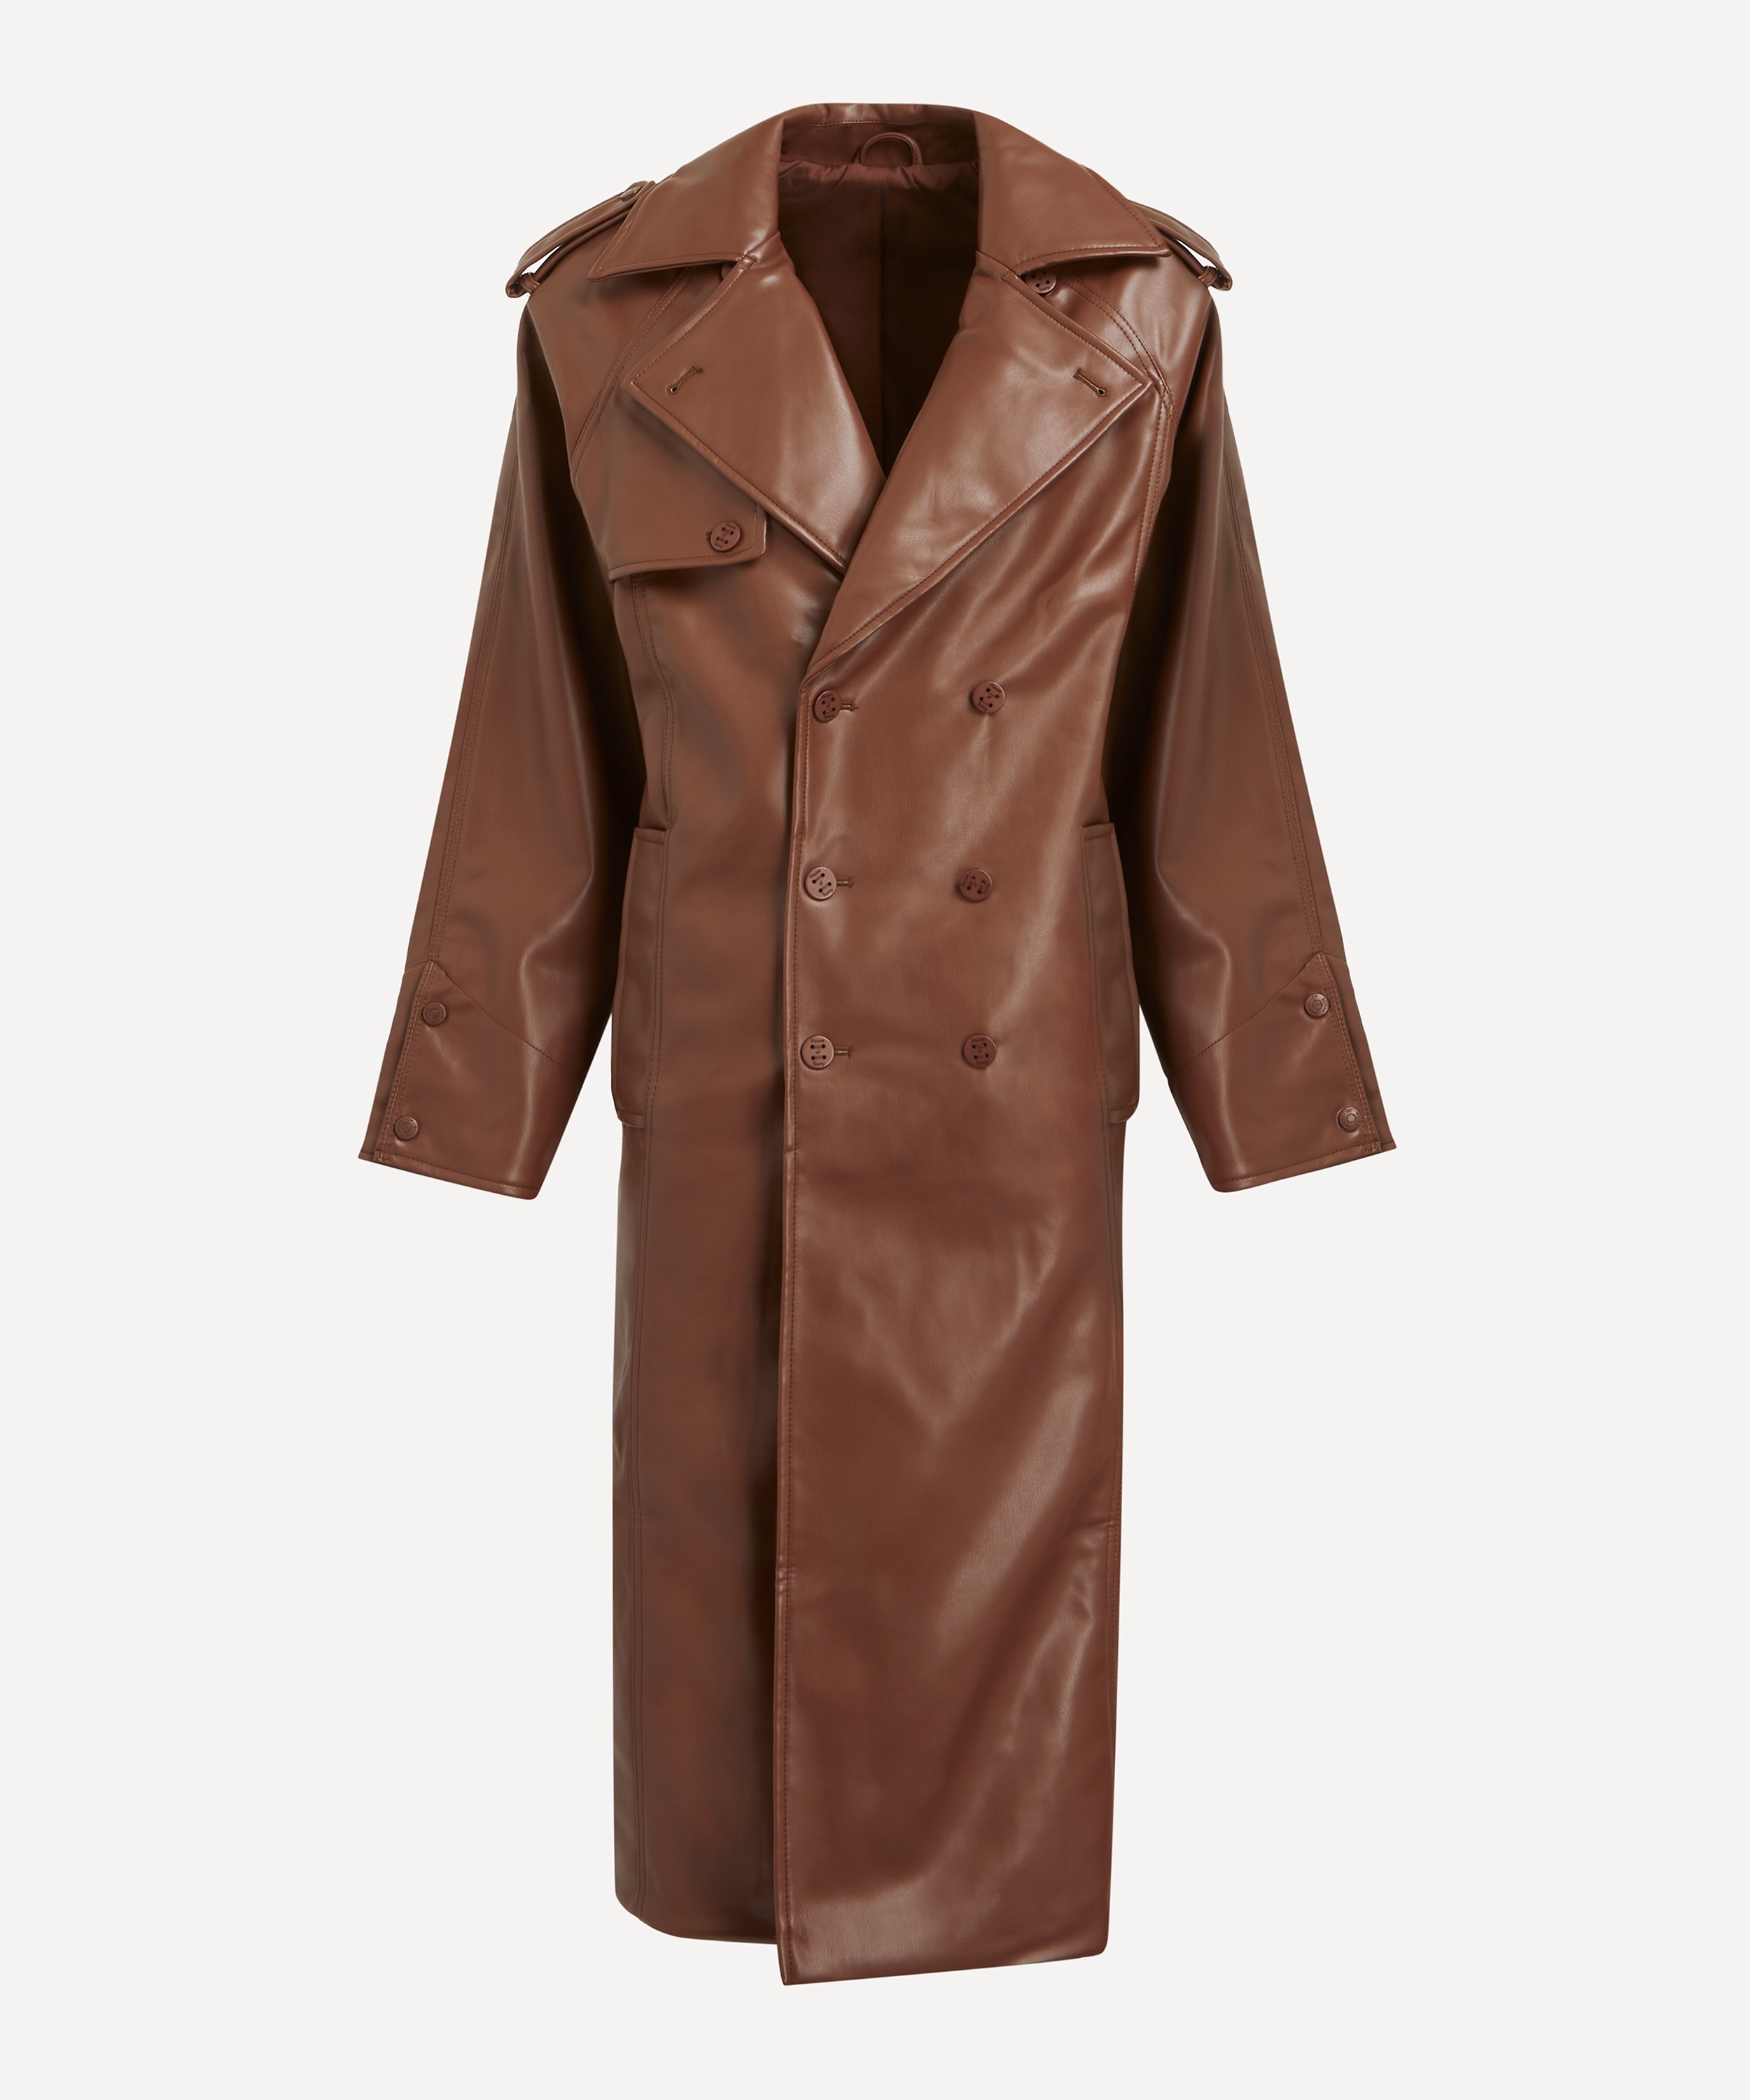 House of Sunny - Montague Trench Coat